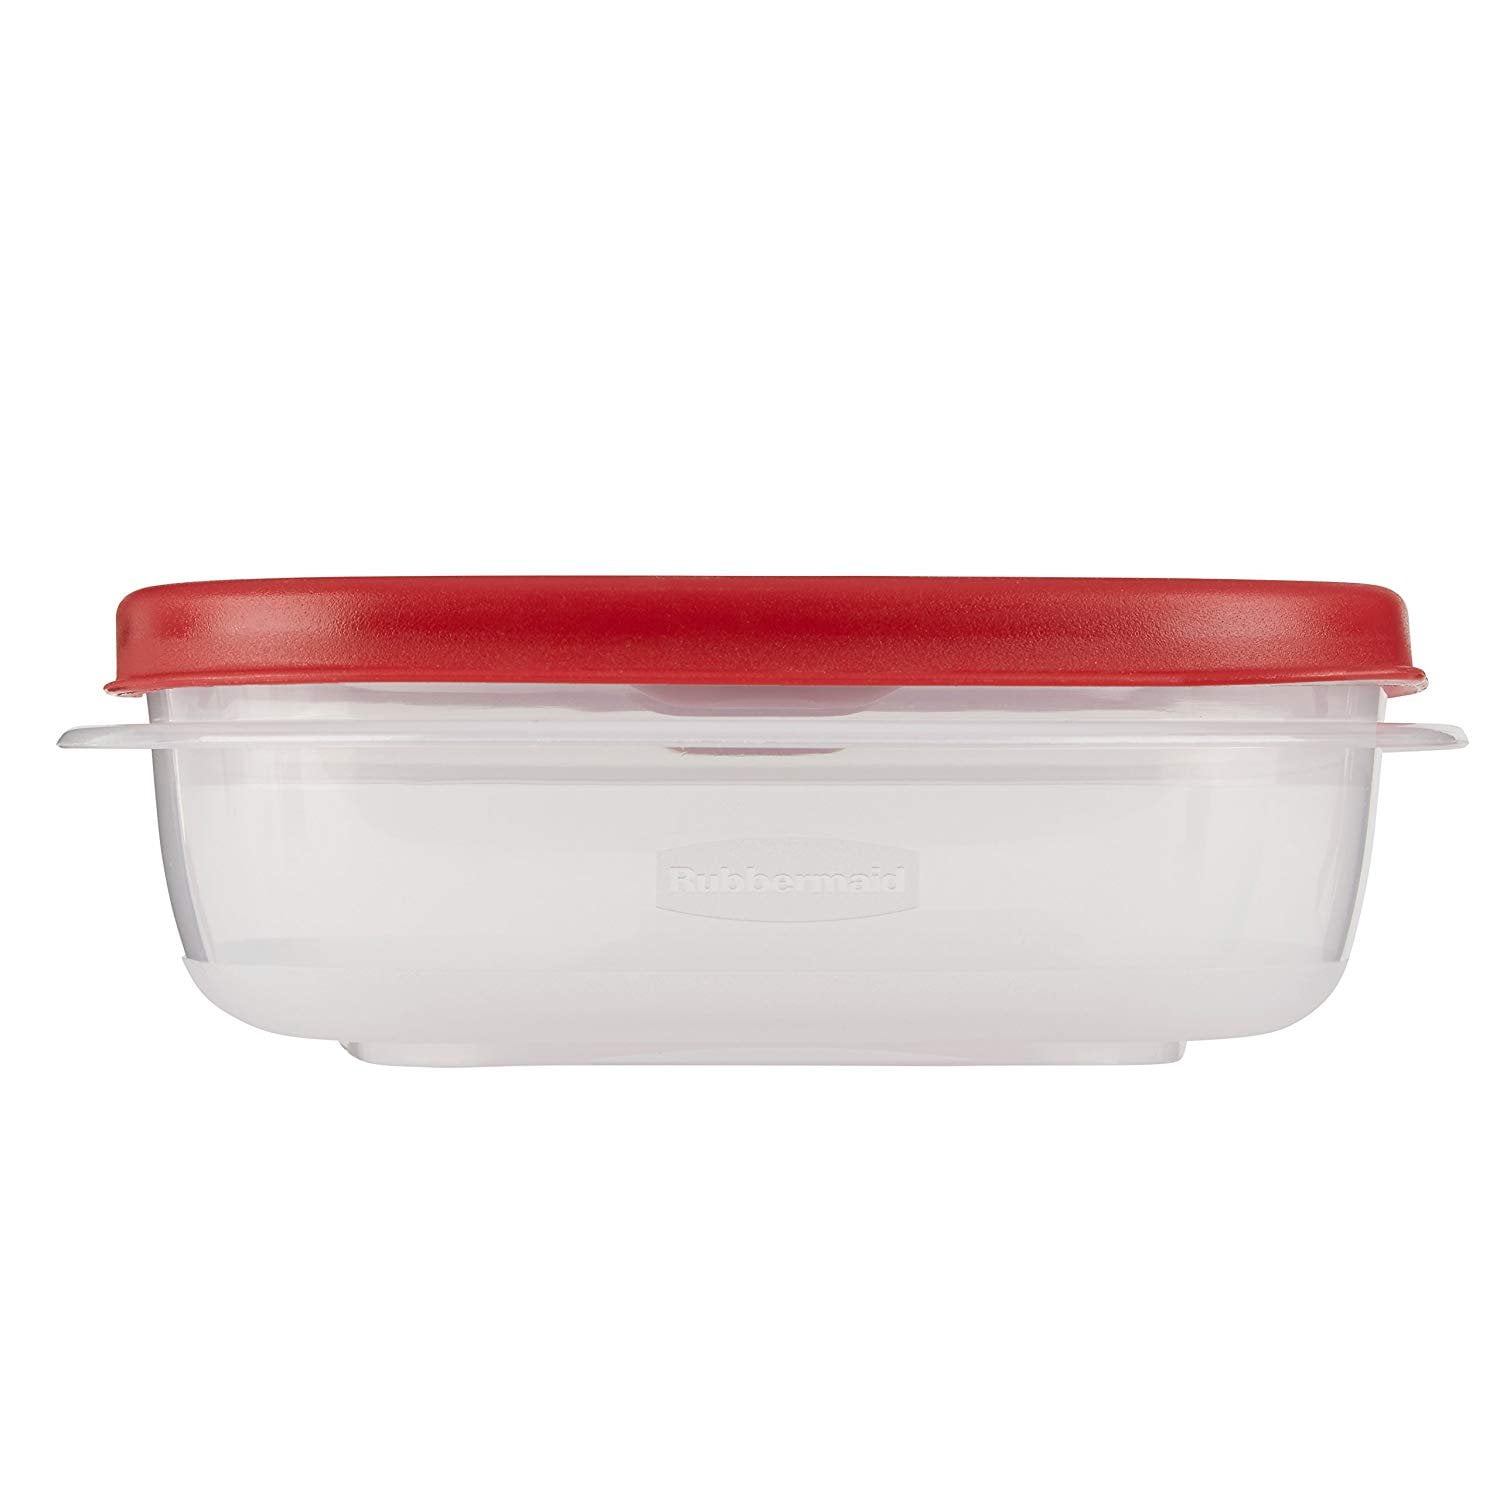 Rubbermaid® Easy-Find Lids Food Storage Container Set - Red/Clear, 4 pk -  Fry's Food Stores